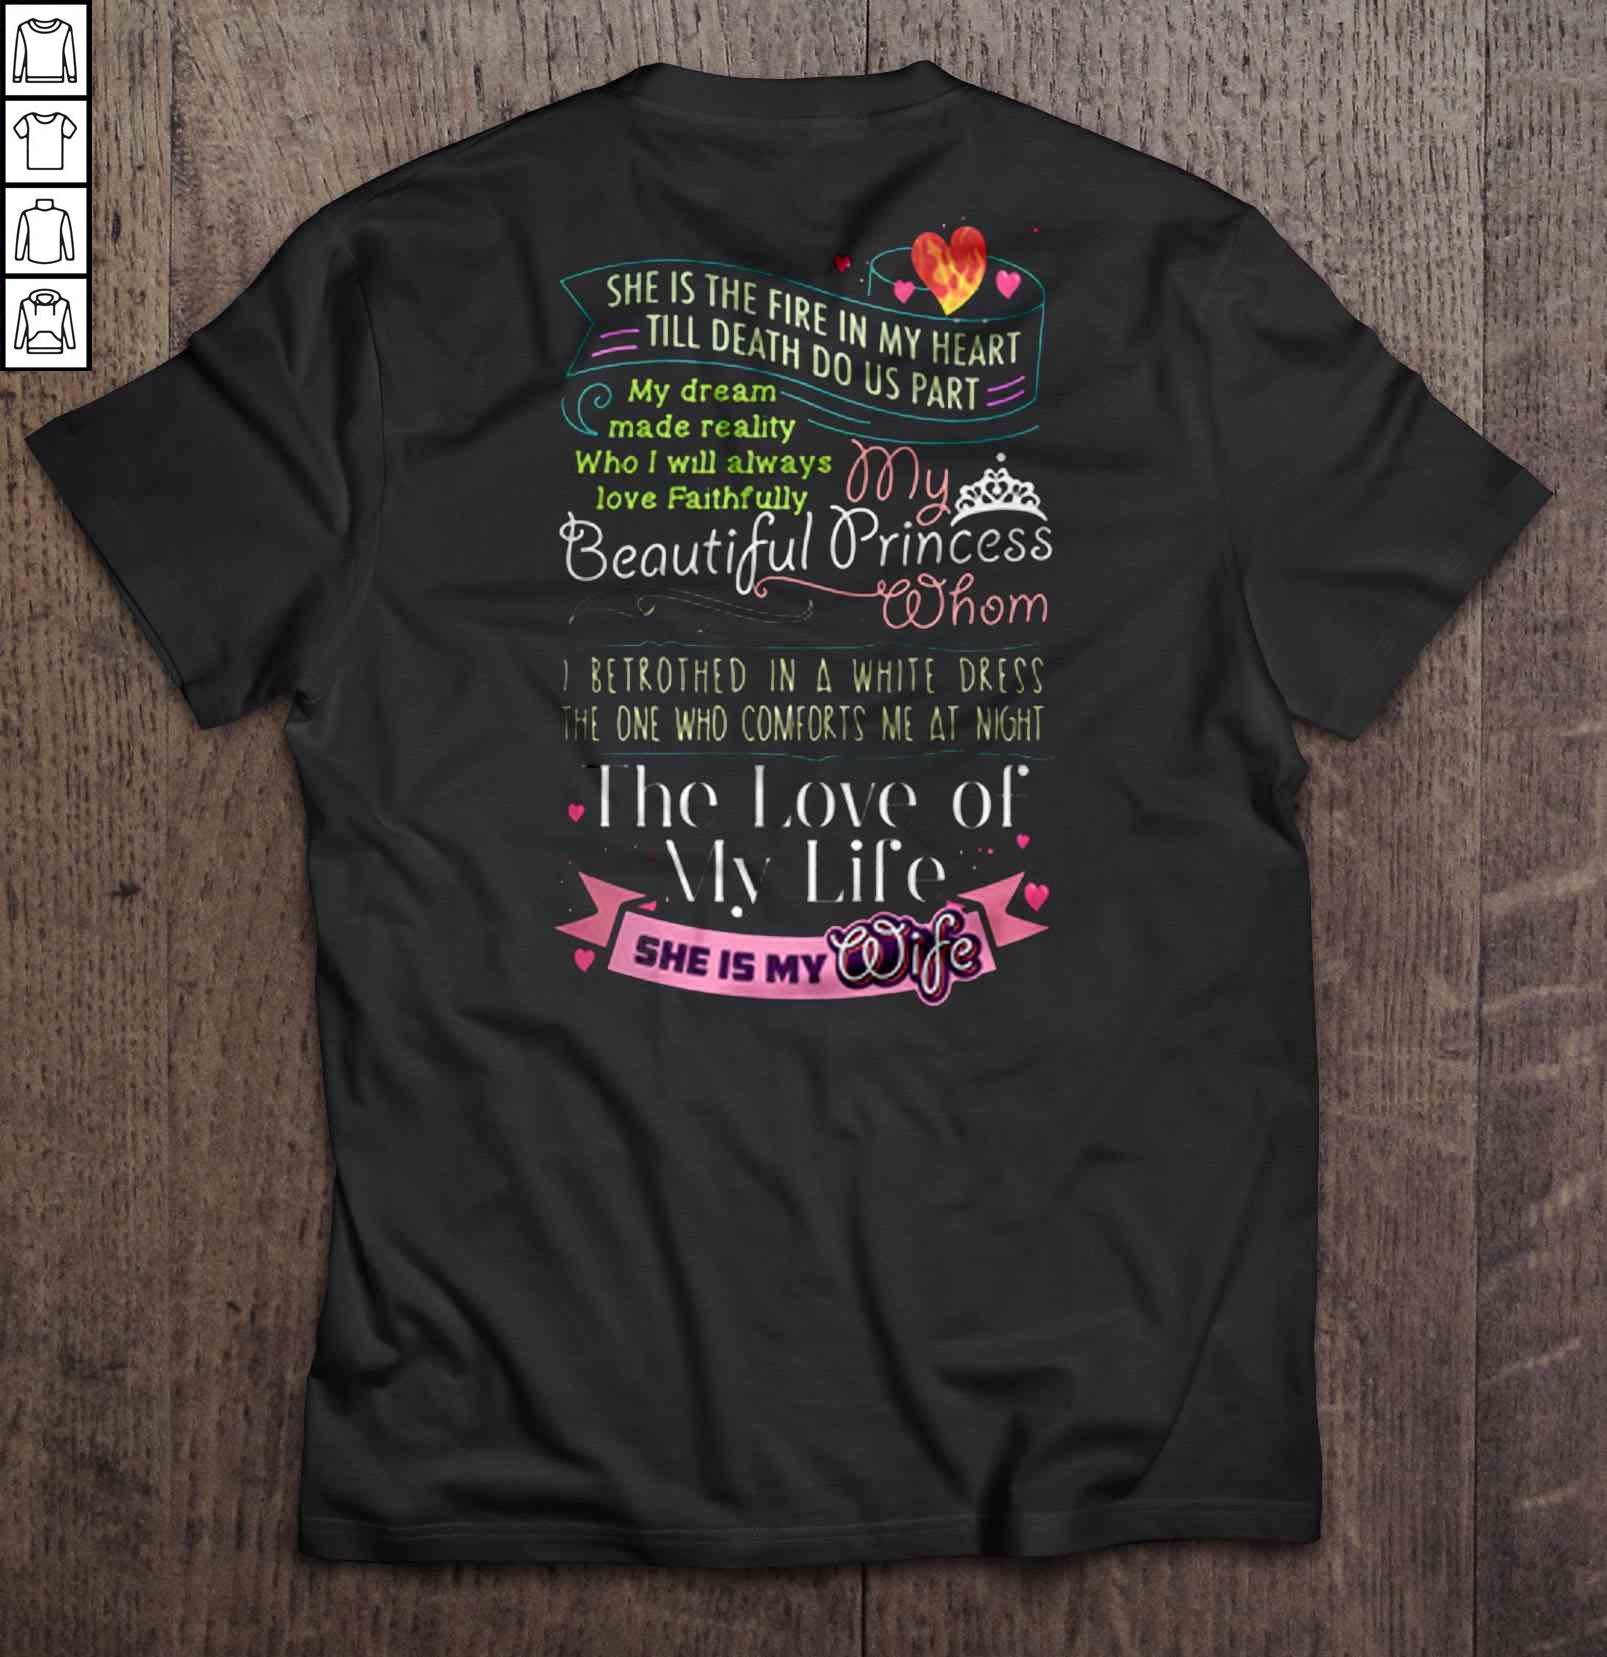 She Is The Fire In My Heart Till Death Do Us Part The Love Of My Life She Is My Wife2 Shirt